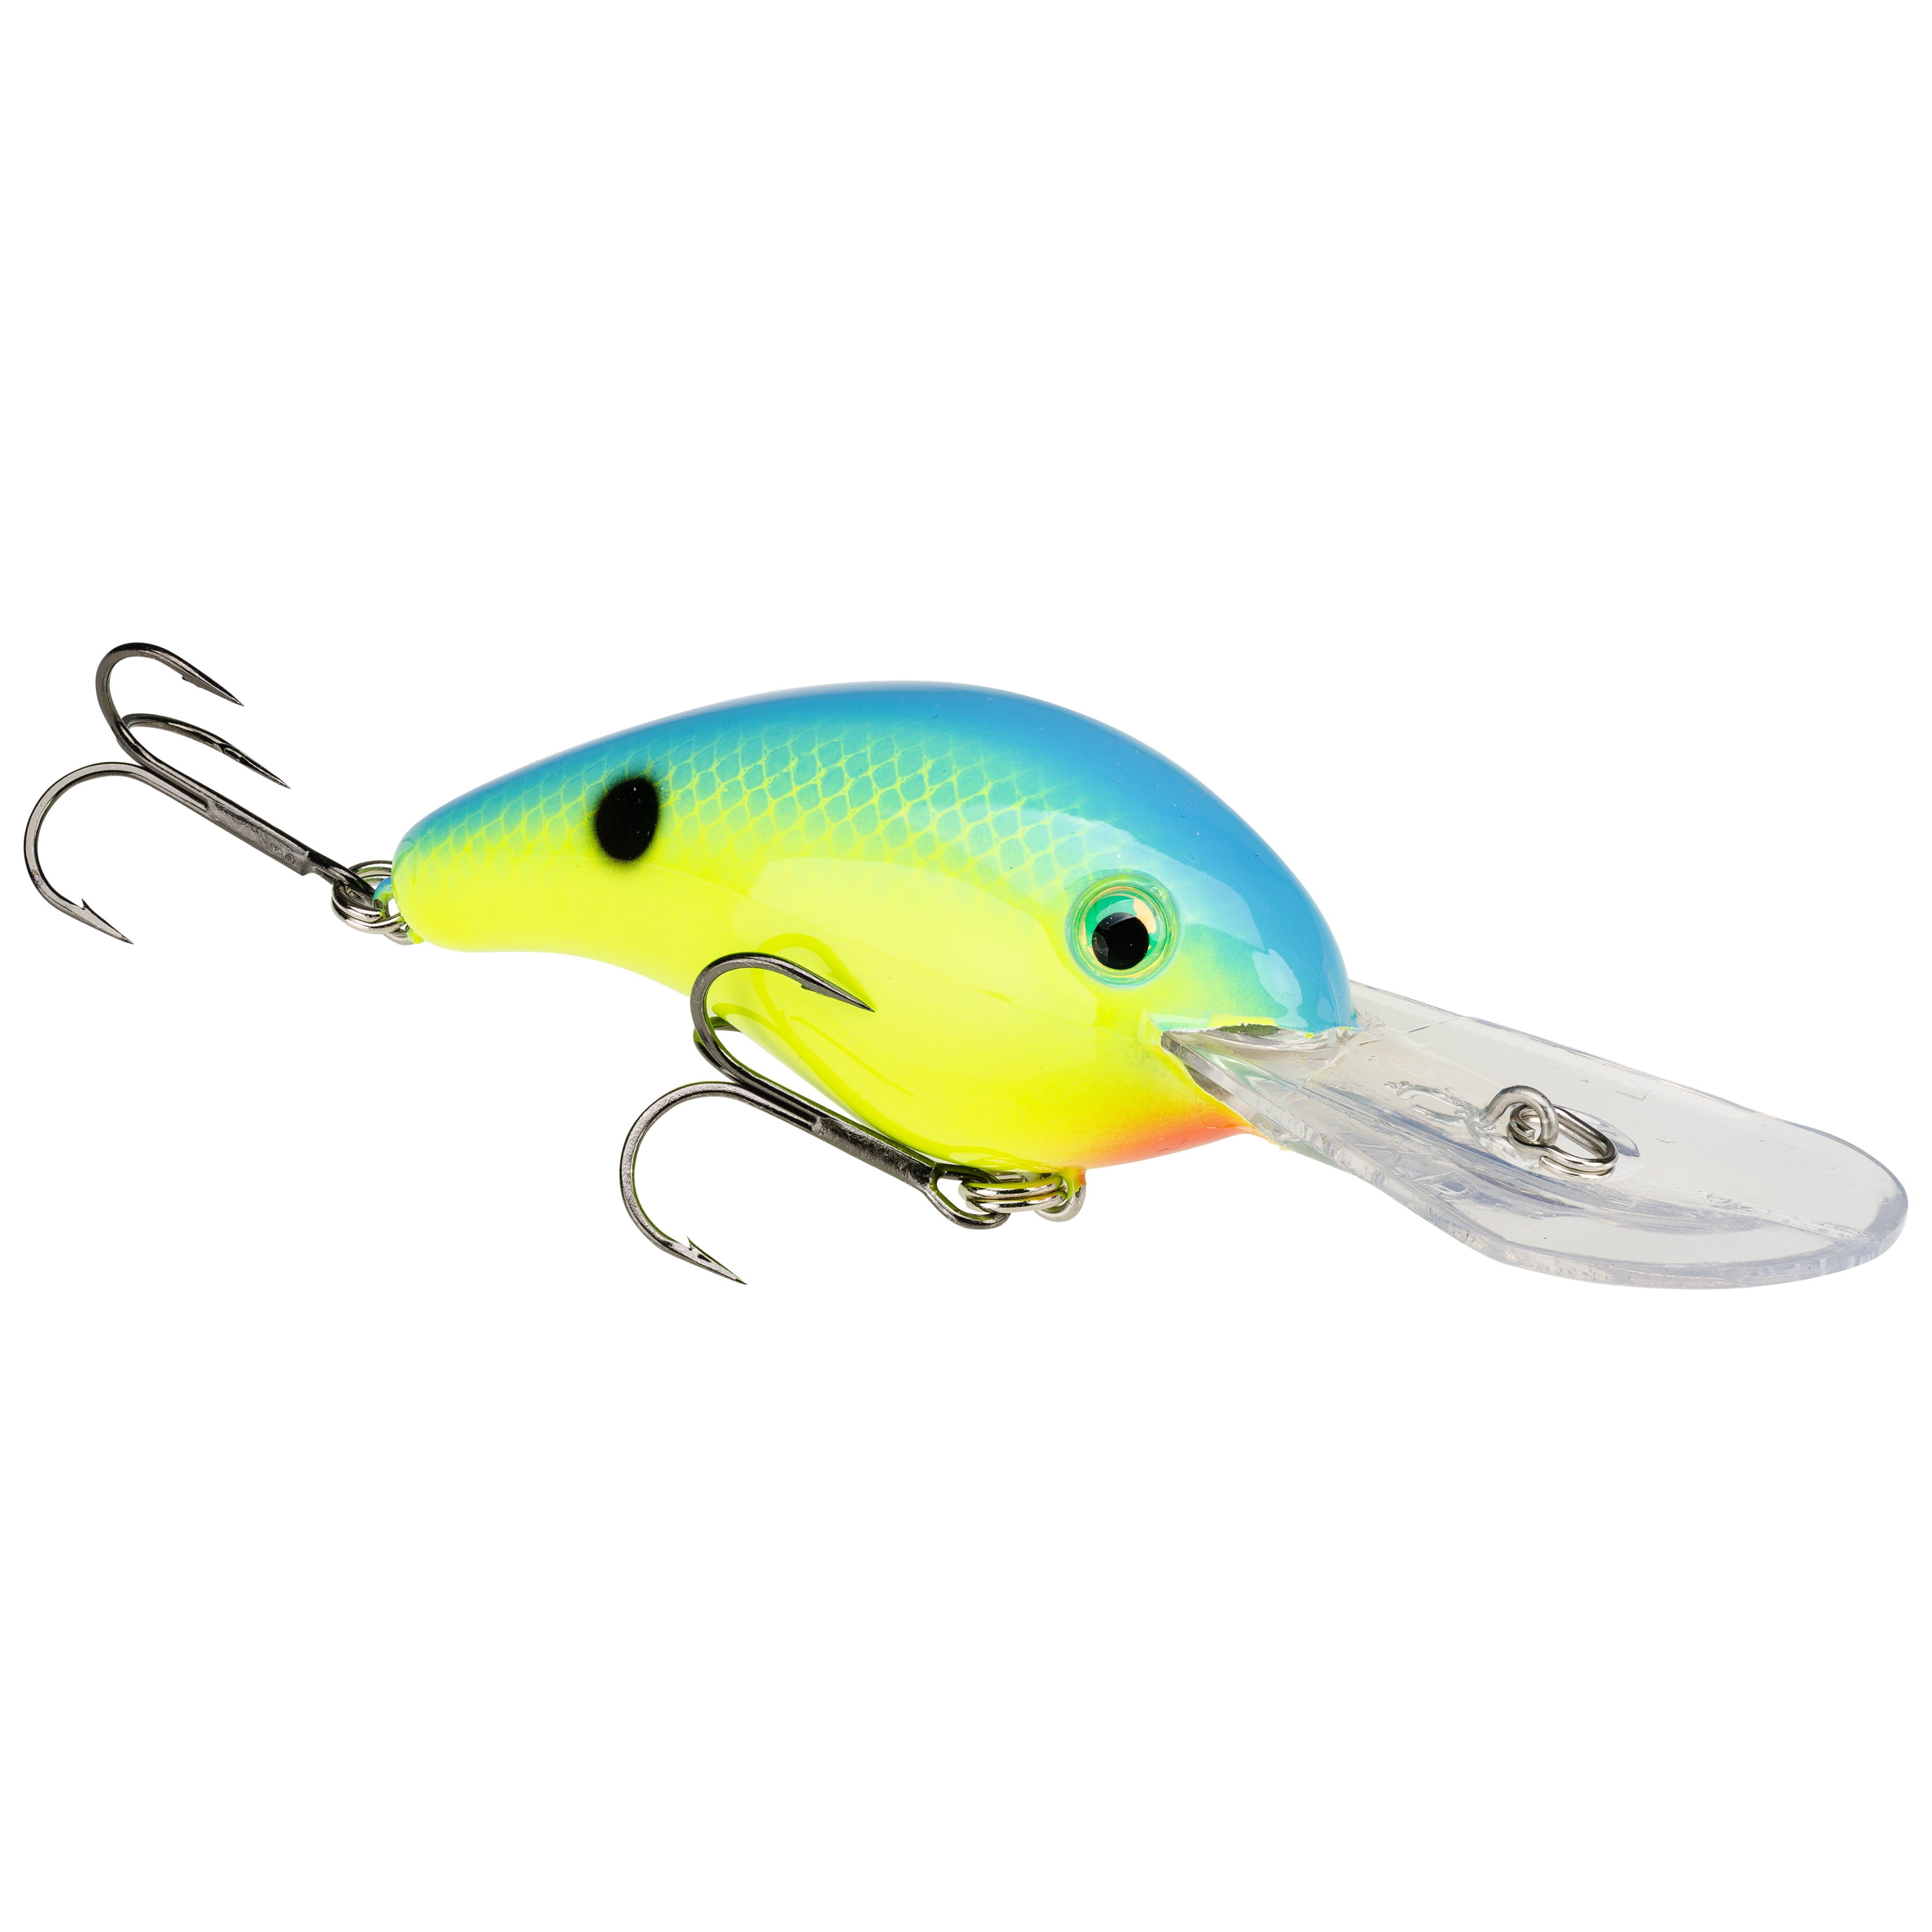 Strike King Lures Series 5xd Crankbait Hc5xd-598 Chartreuse Shad for sale online 